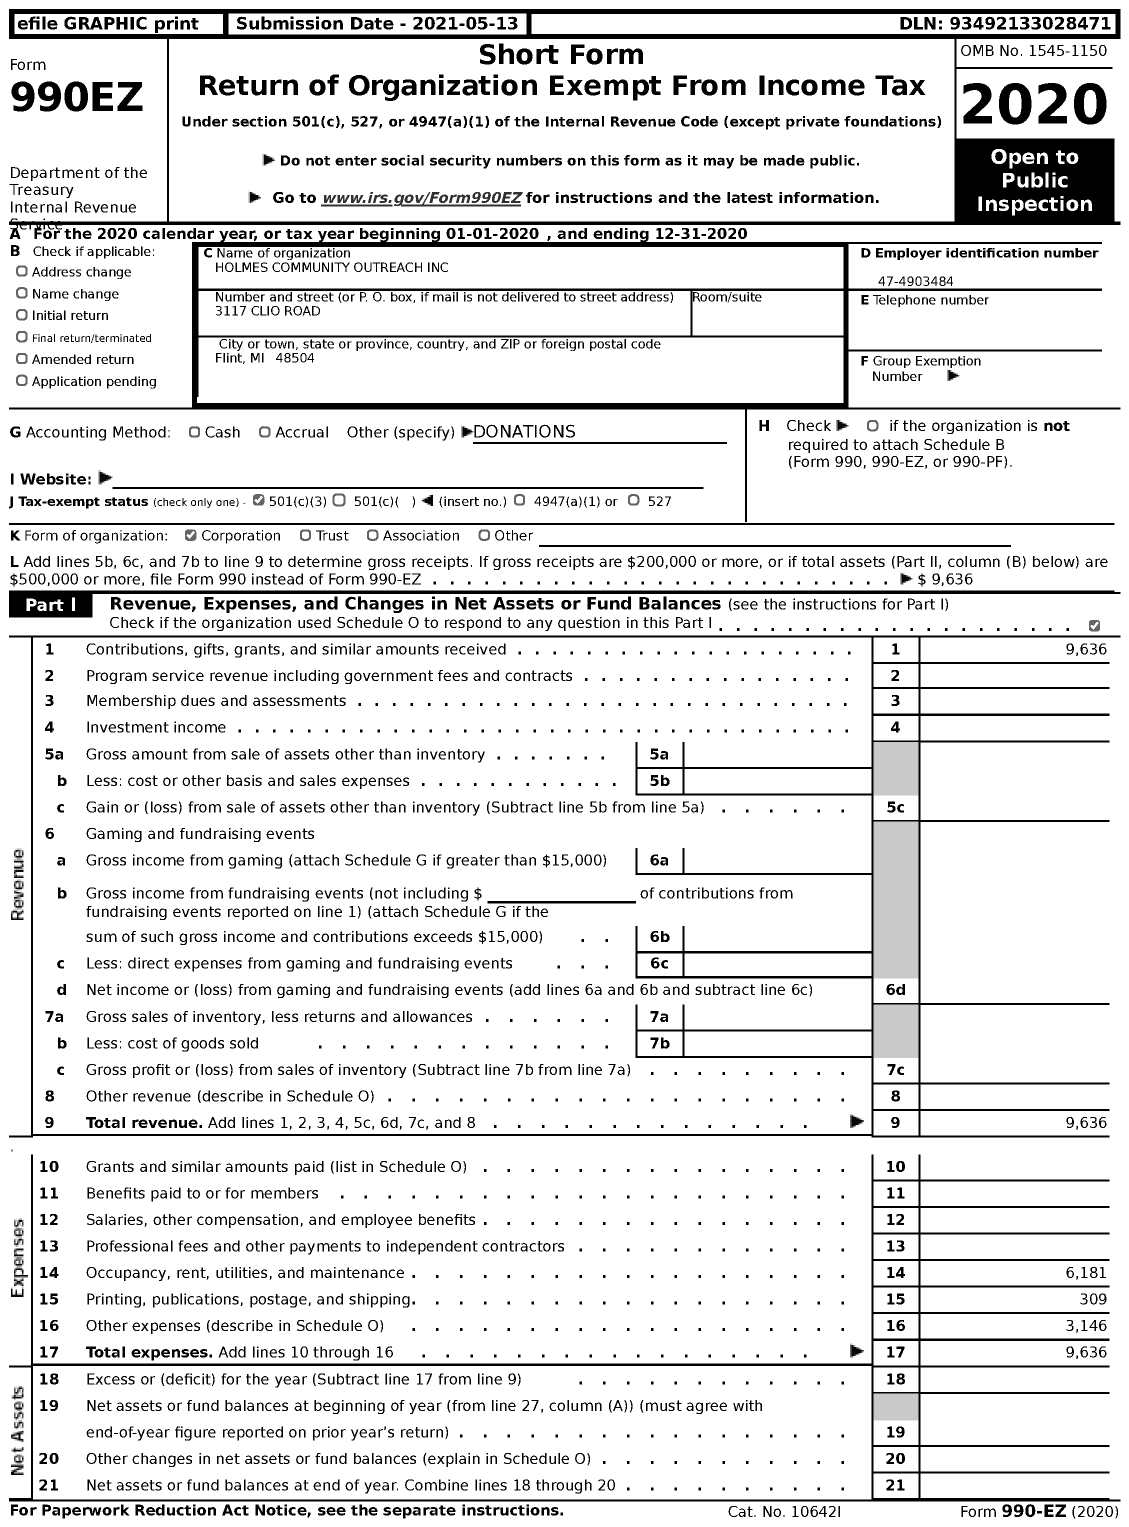 Image of first page of 2020 Form 990EZ for Holmes Community Outreach